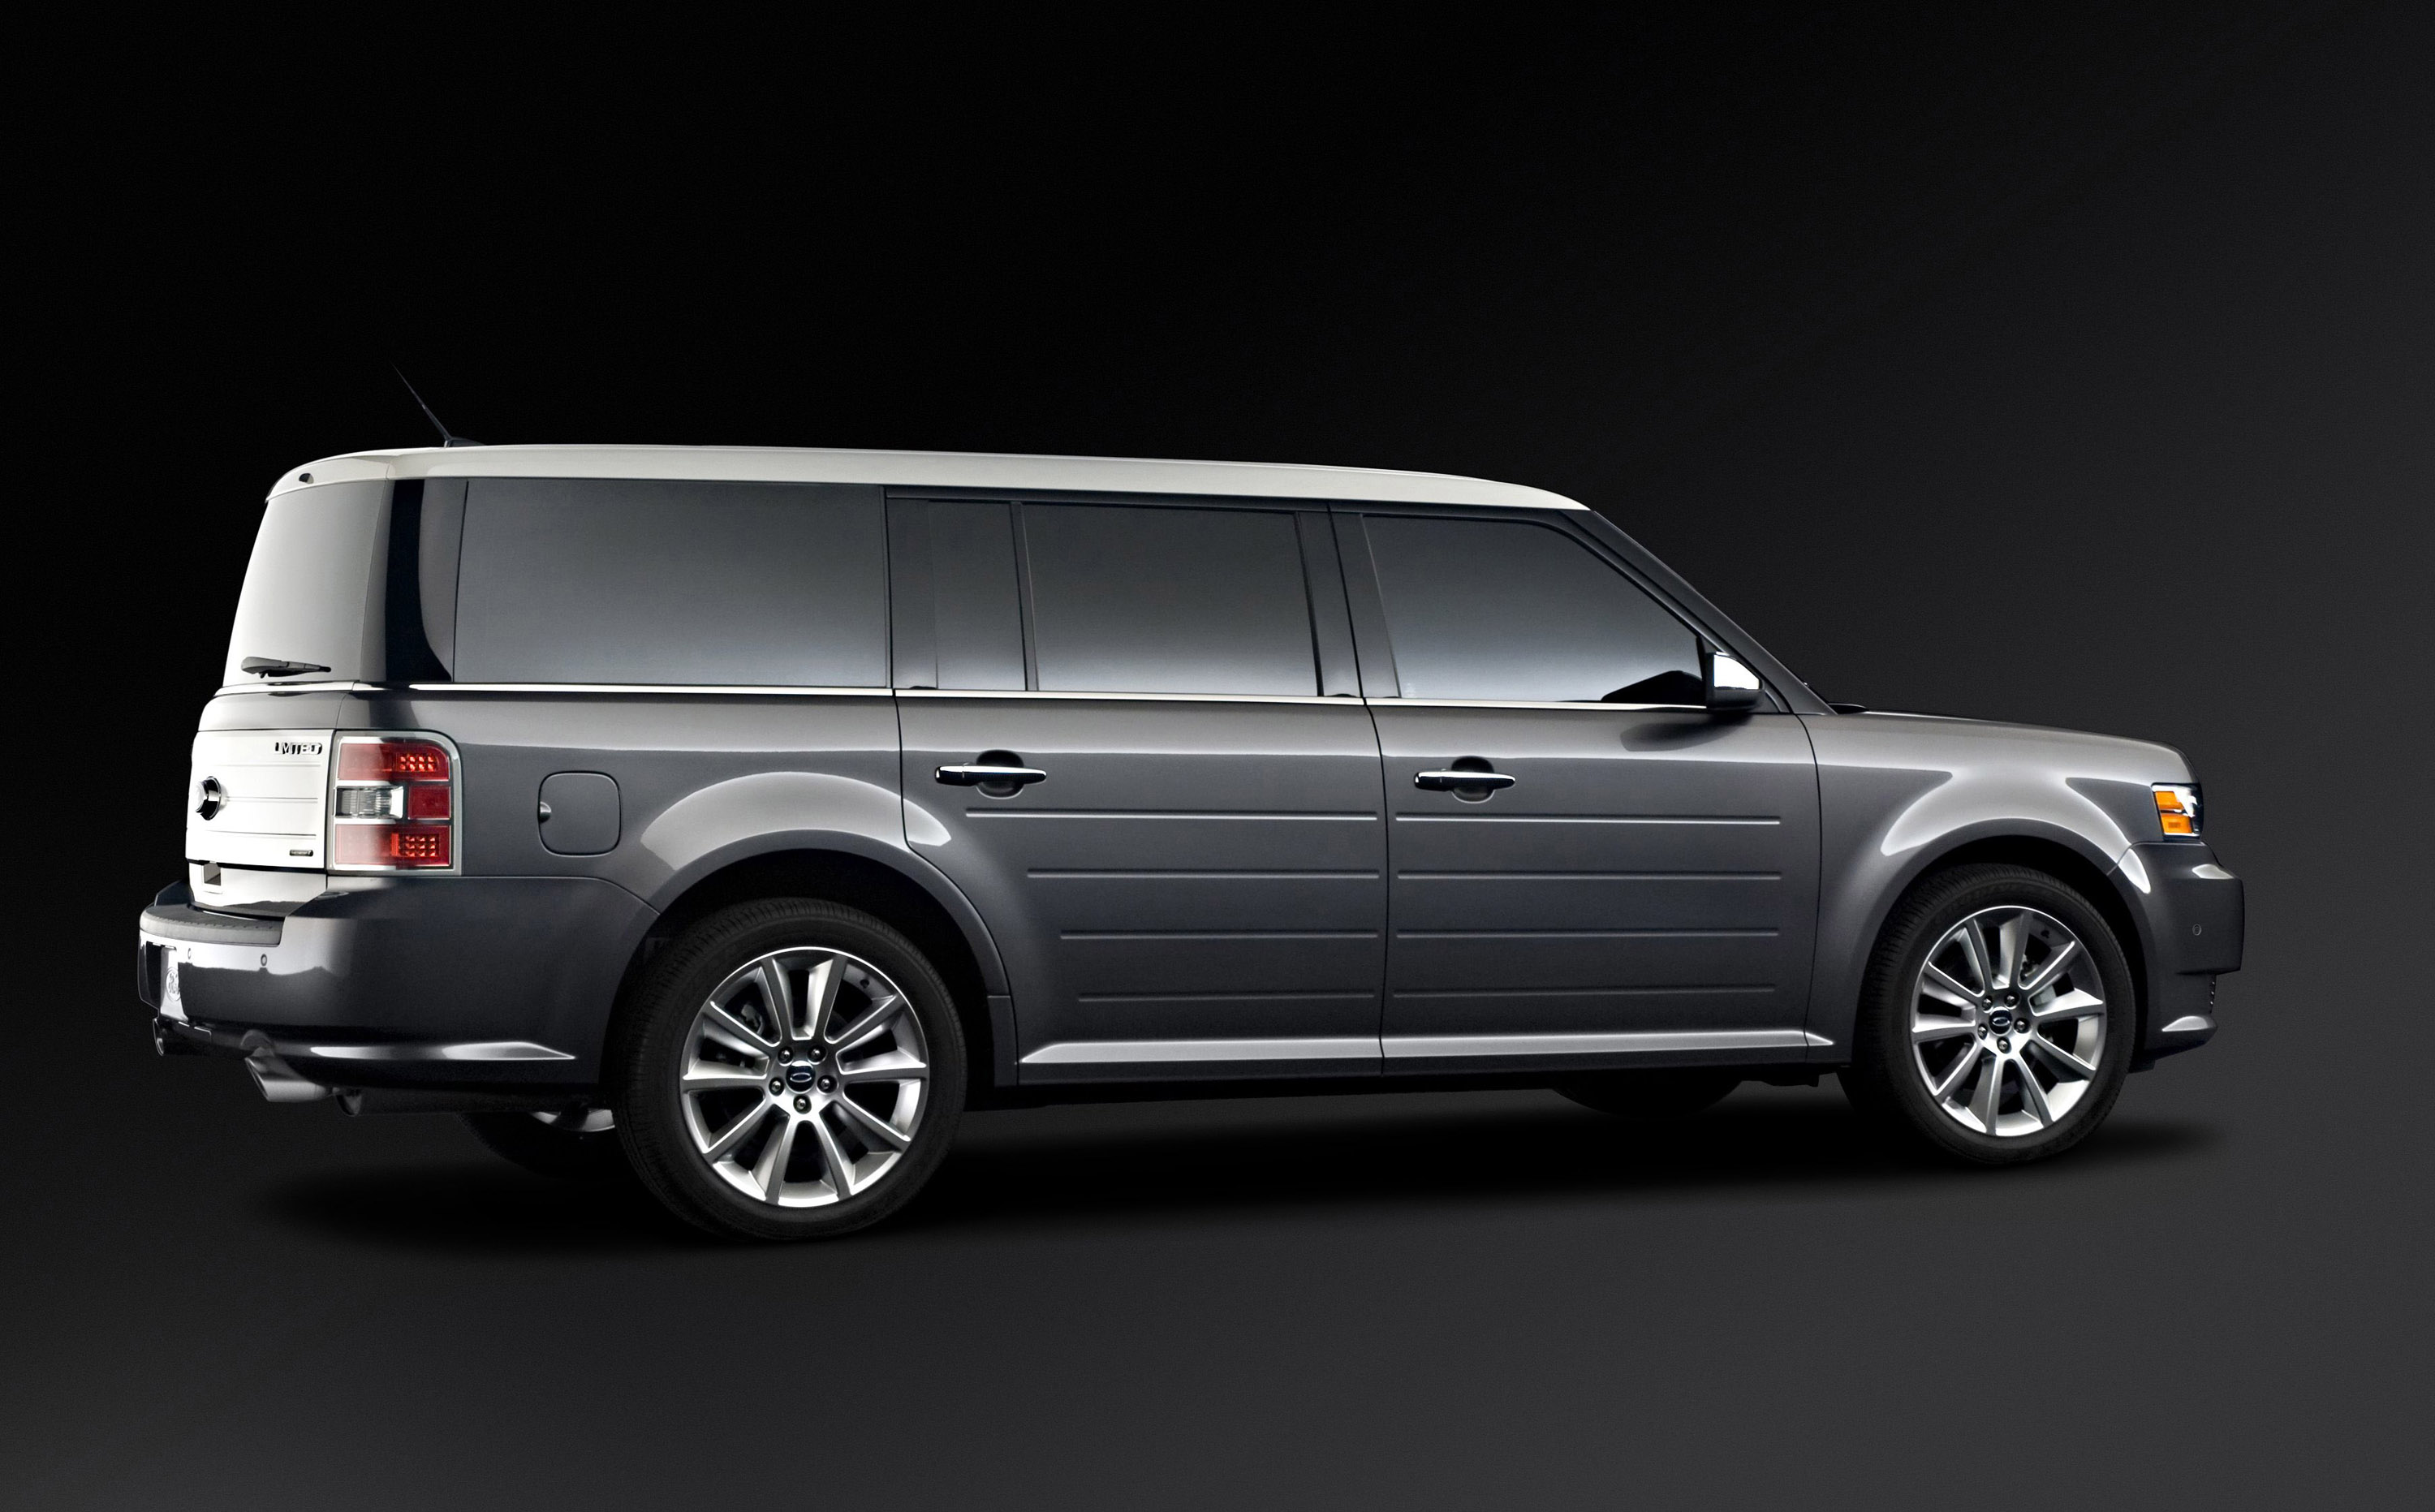 2010 Ford flex ecoboost performance parts